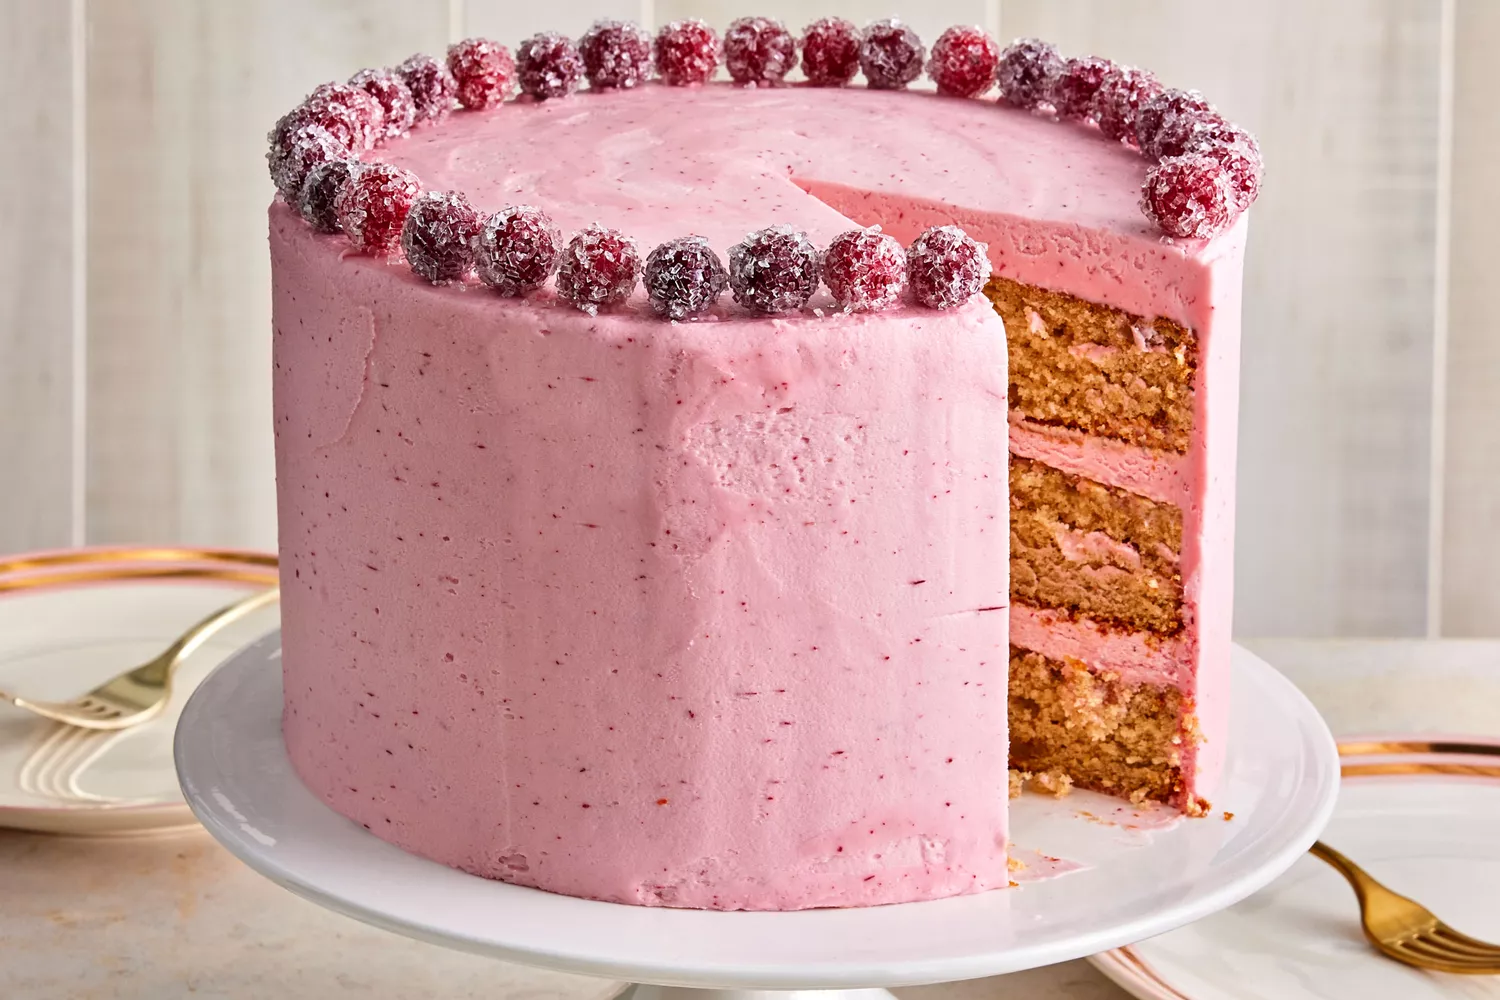 Gingerbread cake with cranberry-vanilla frosting on white cake stand